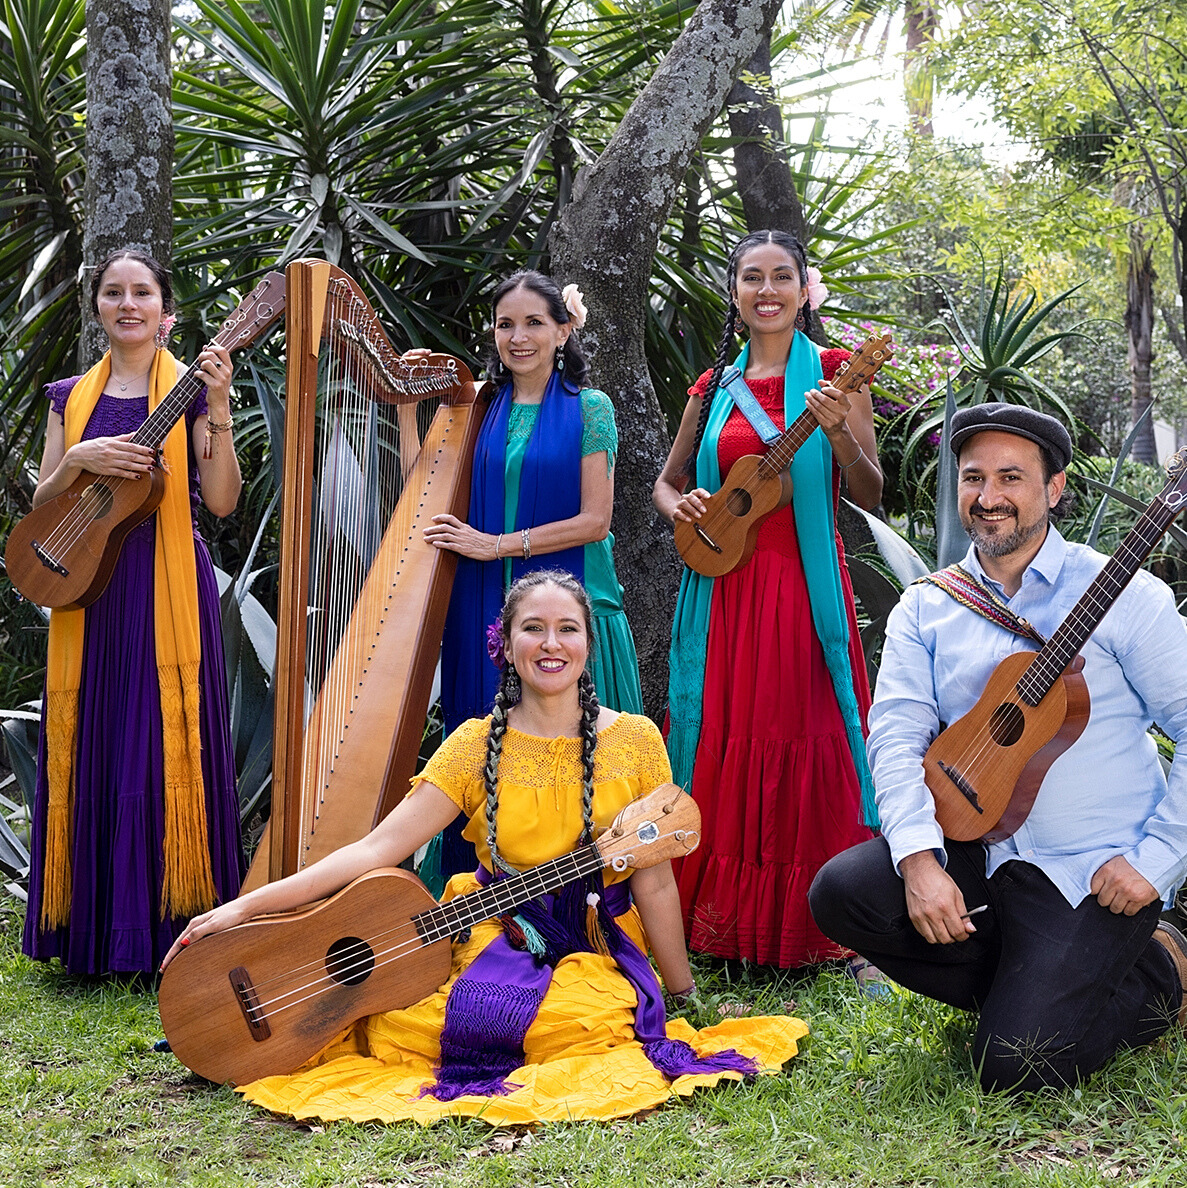 A photo of all the members of Caña Dulce y Caña Brava in vibrant clothing while positioned next to their respective instruments.